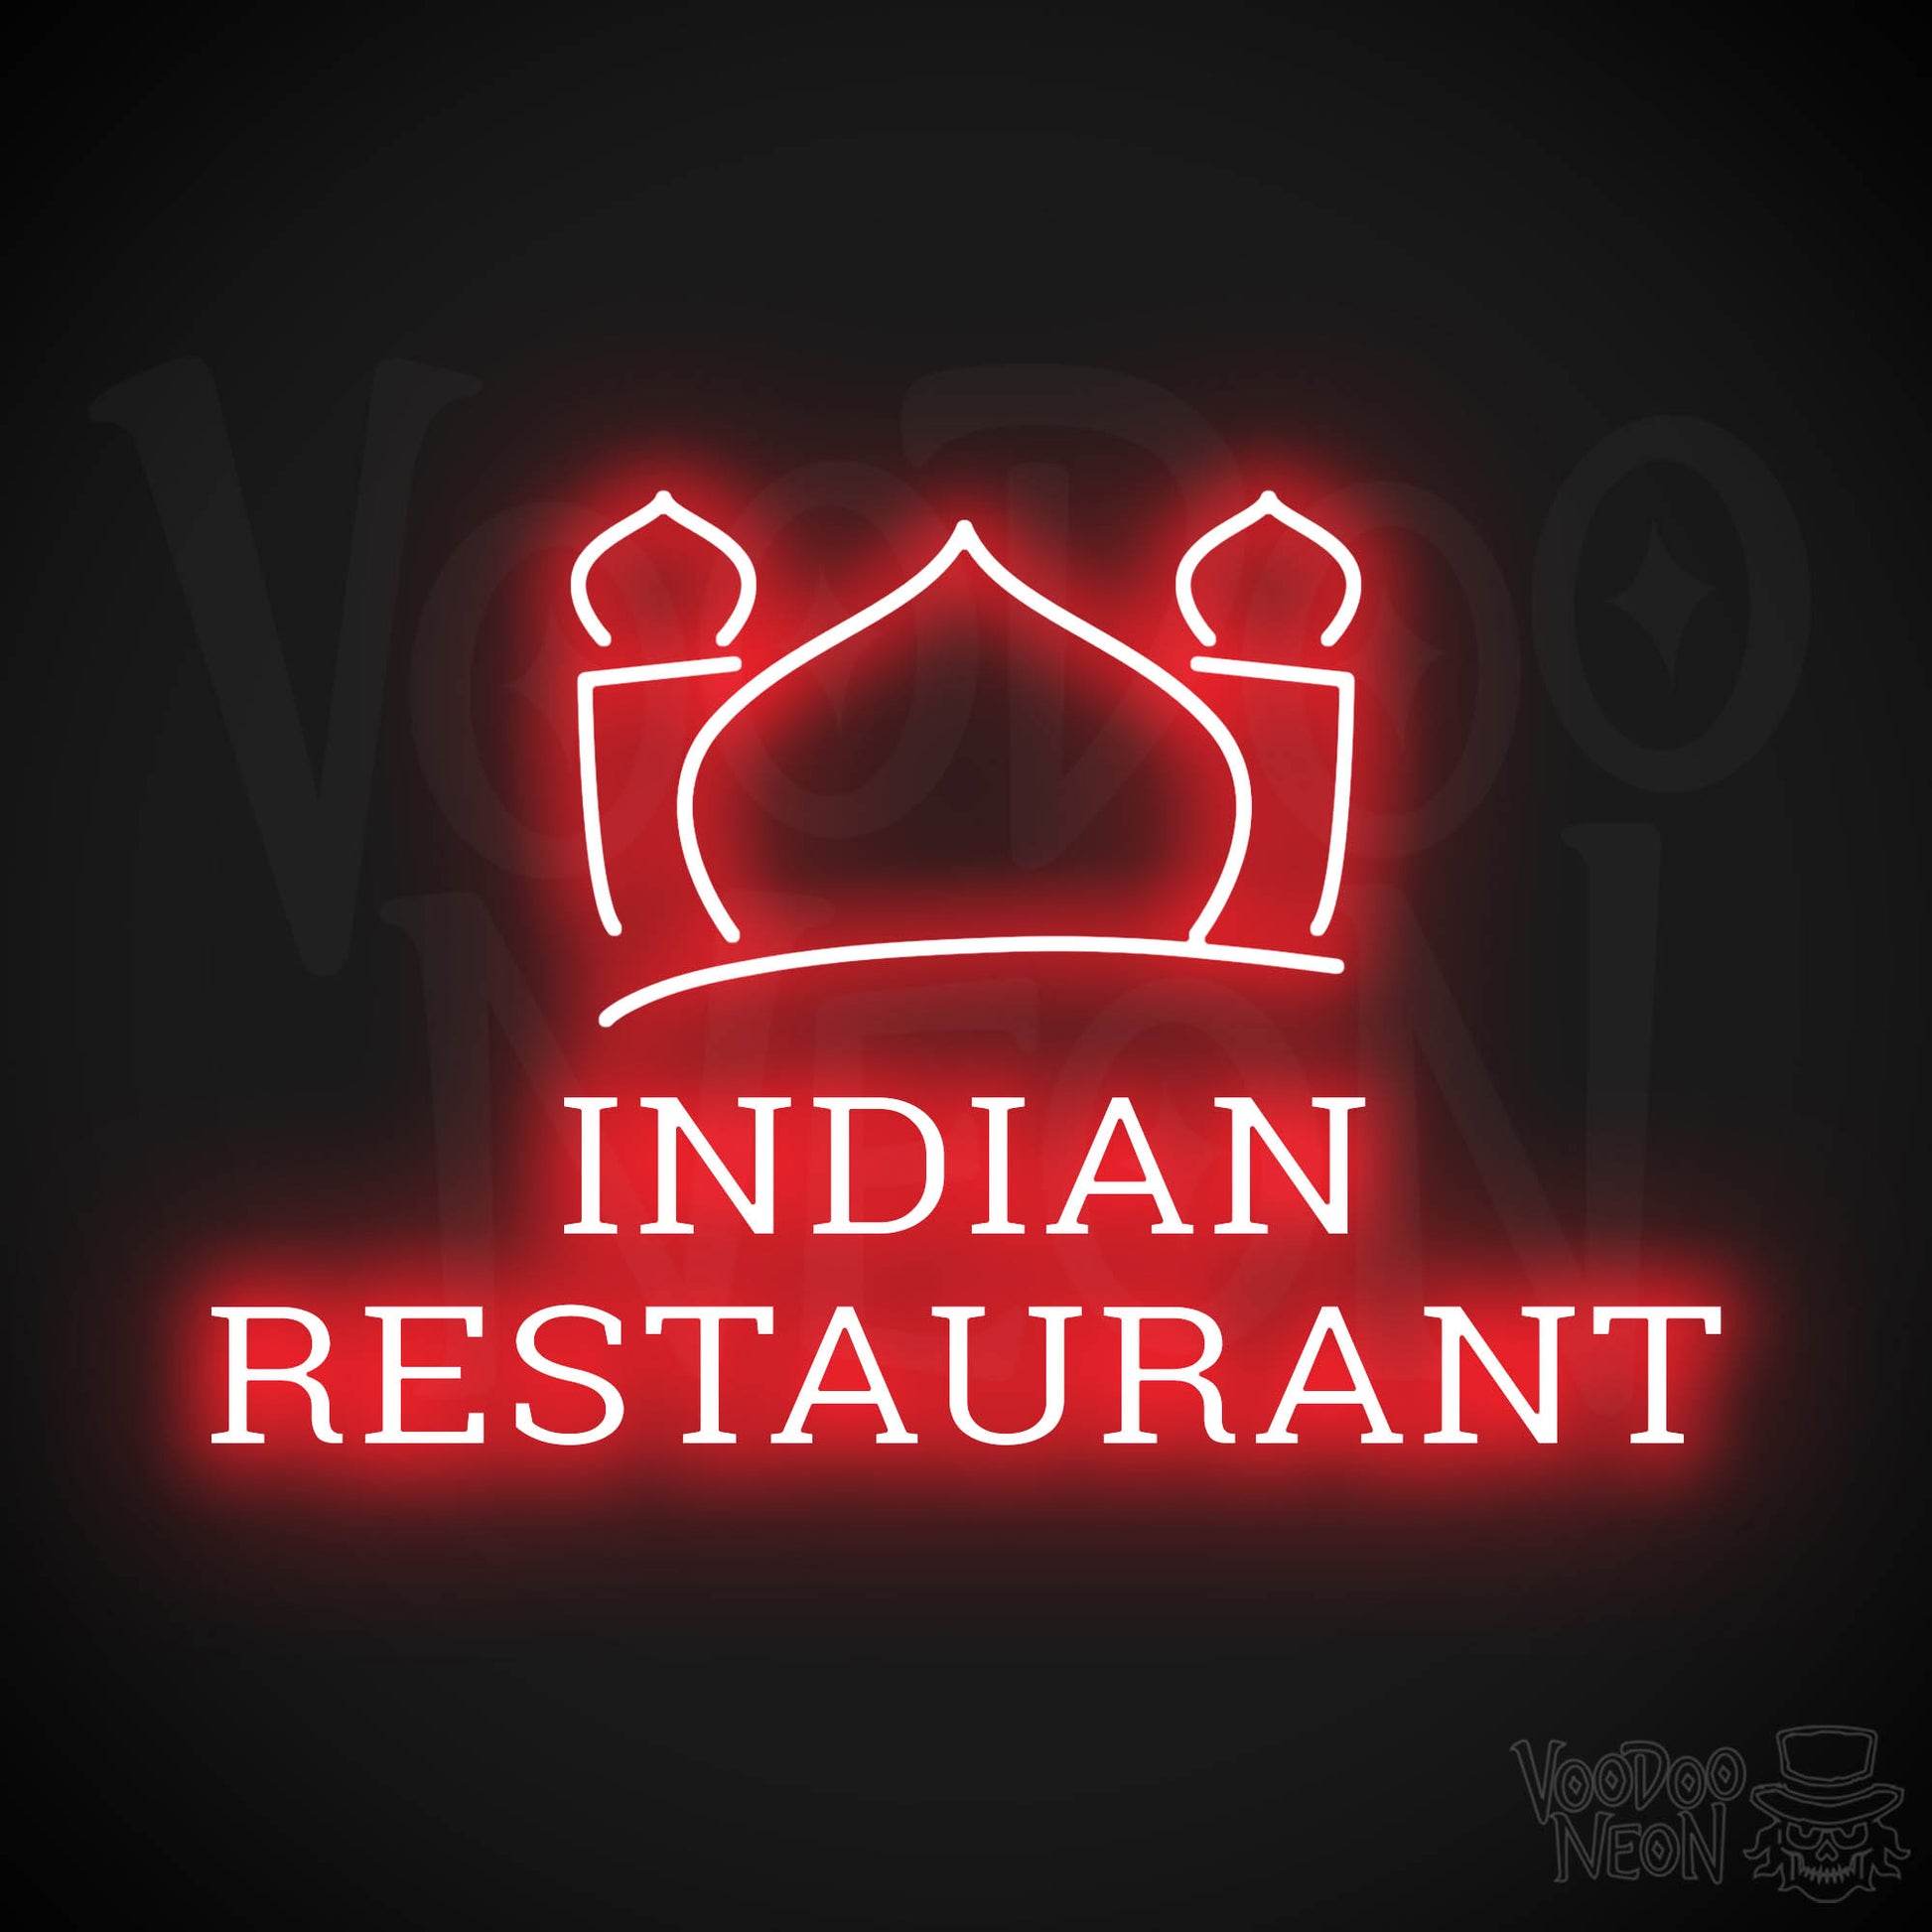 Indian Restaurant LED Neon - Red